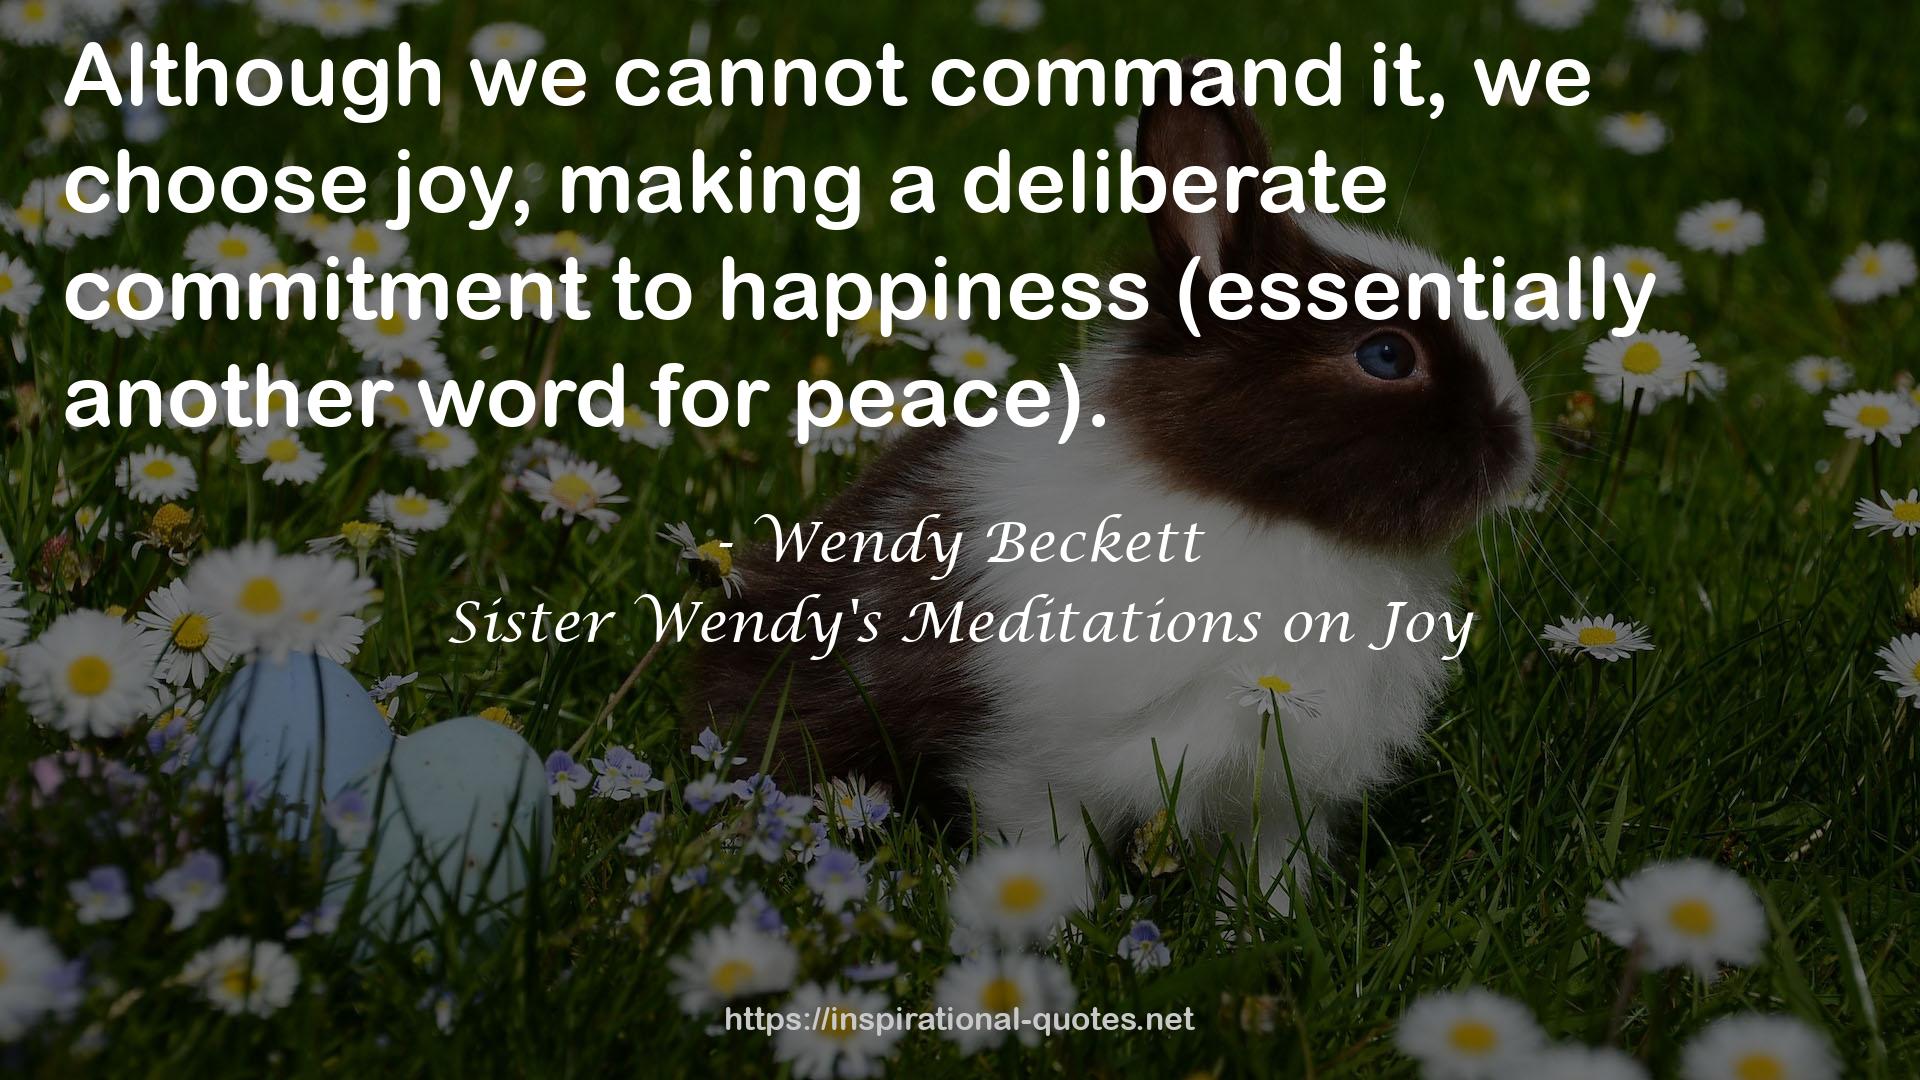 Sister Wendy's Meditations on Joy QUOTES